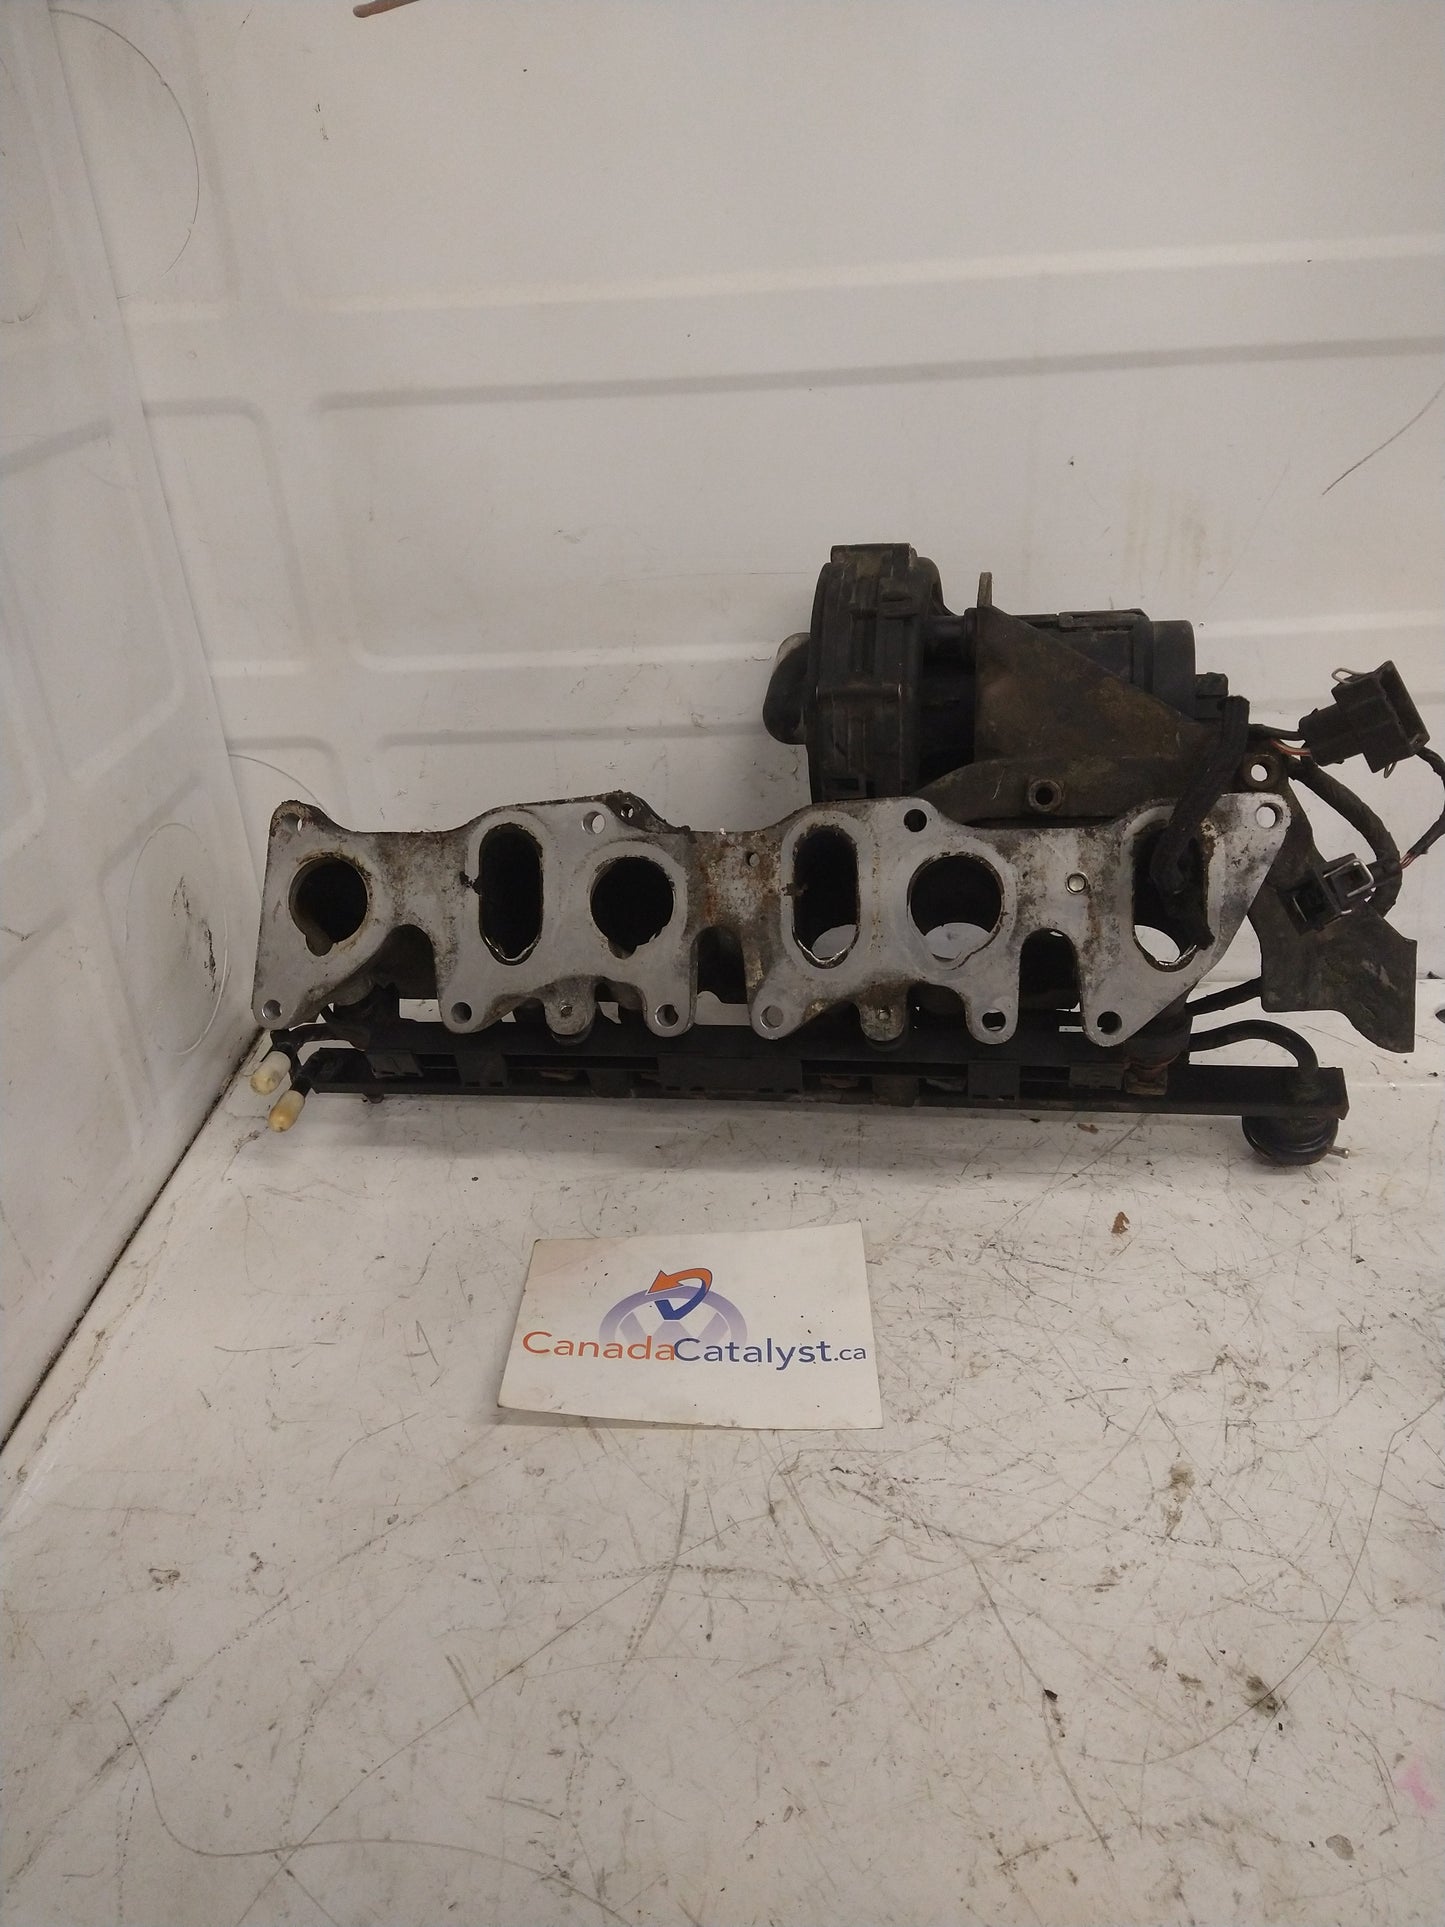 MK3 VR6 Lower Intake With Fuel RAIL